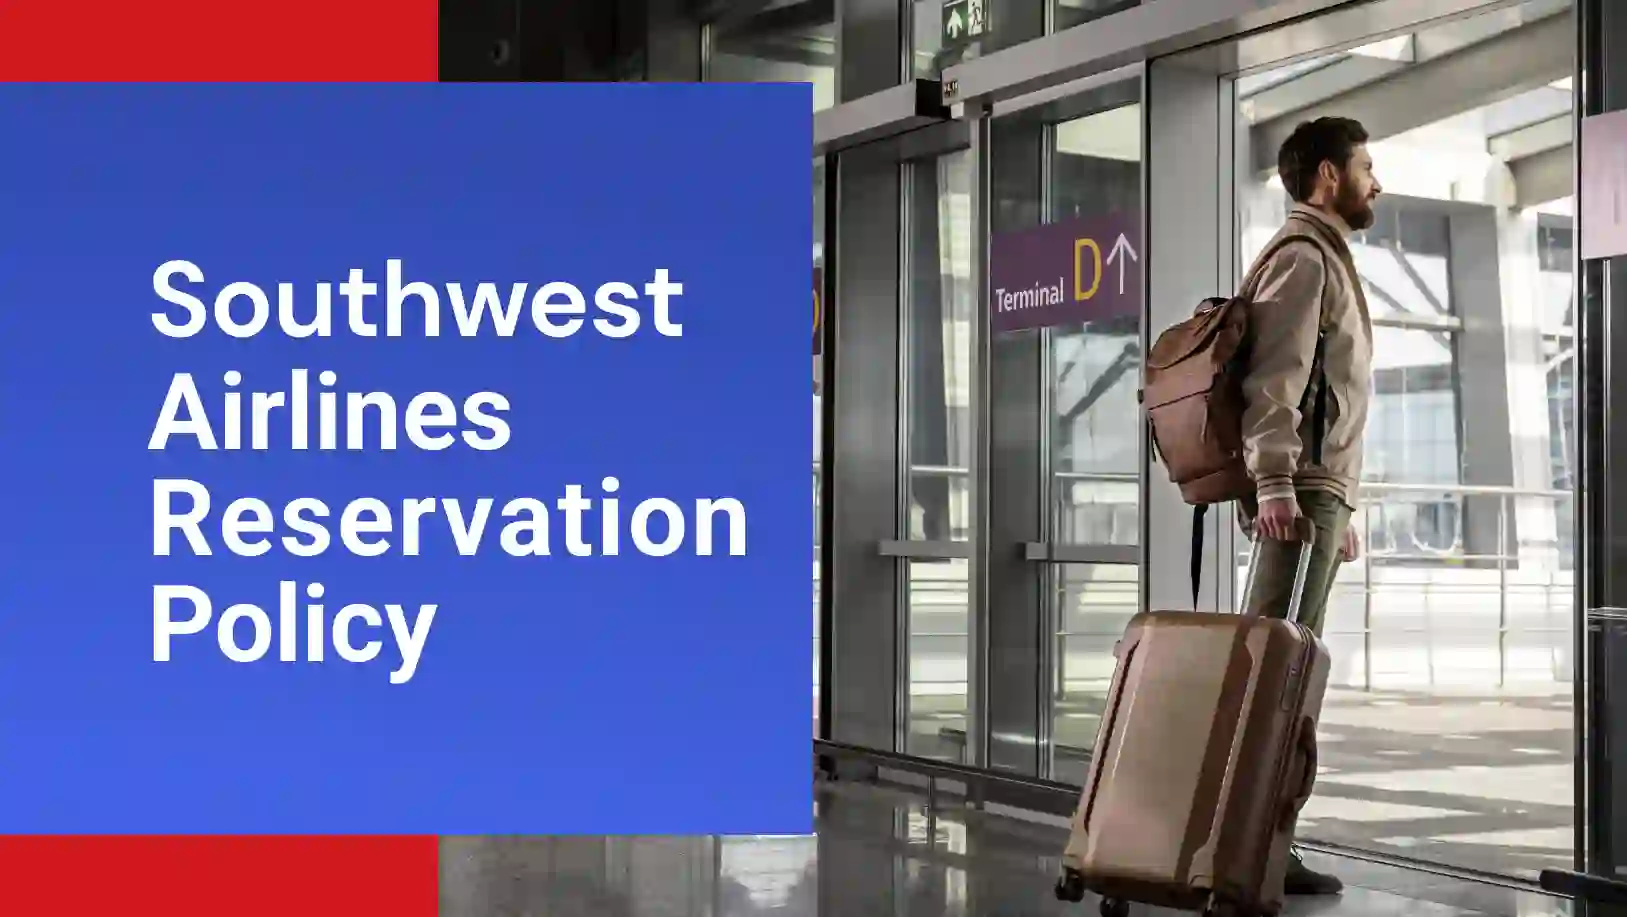 Southwest Airlines Flight Reservation Policy